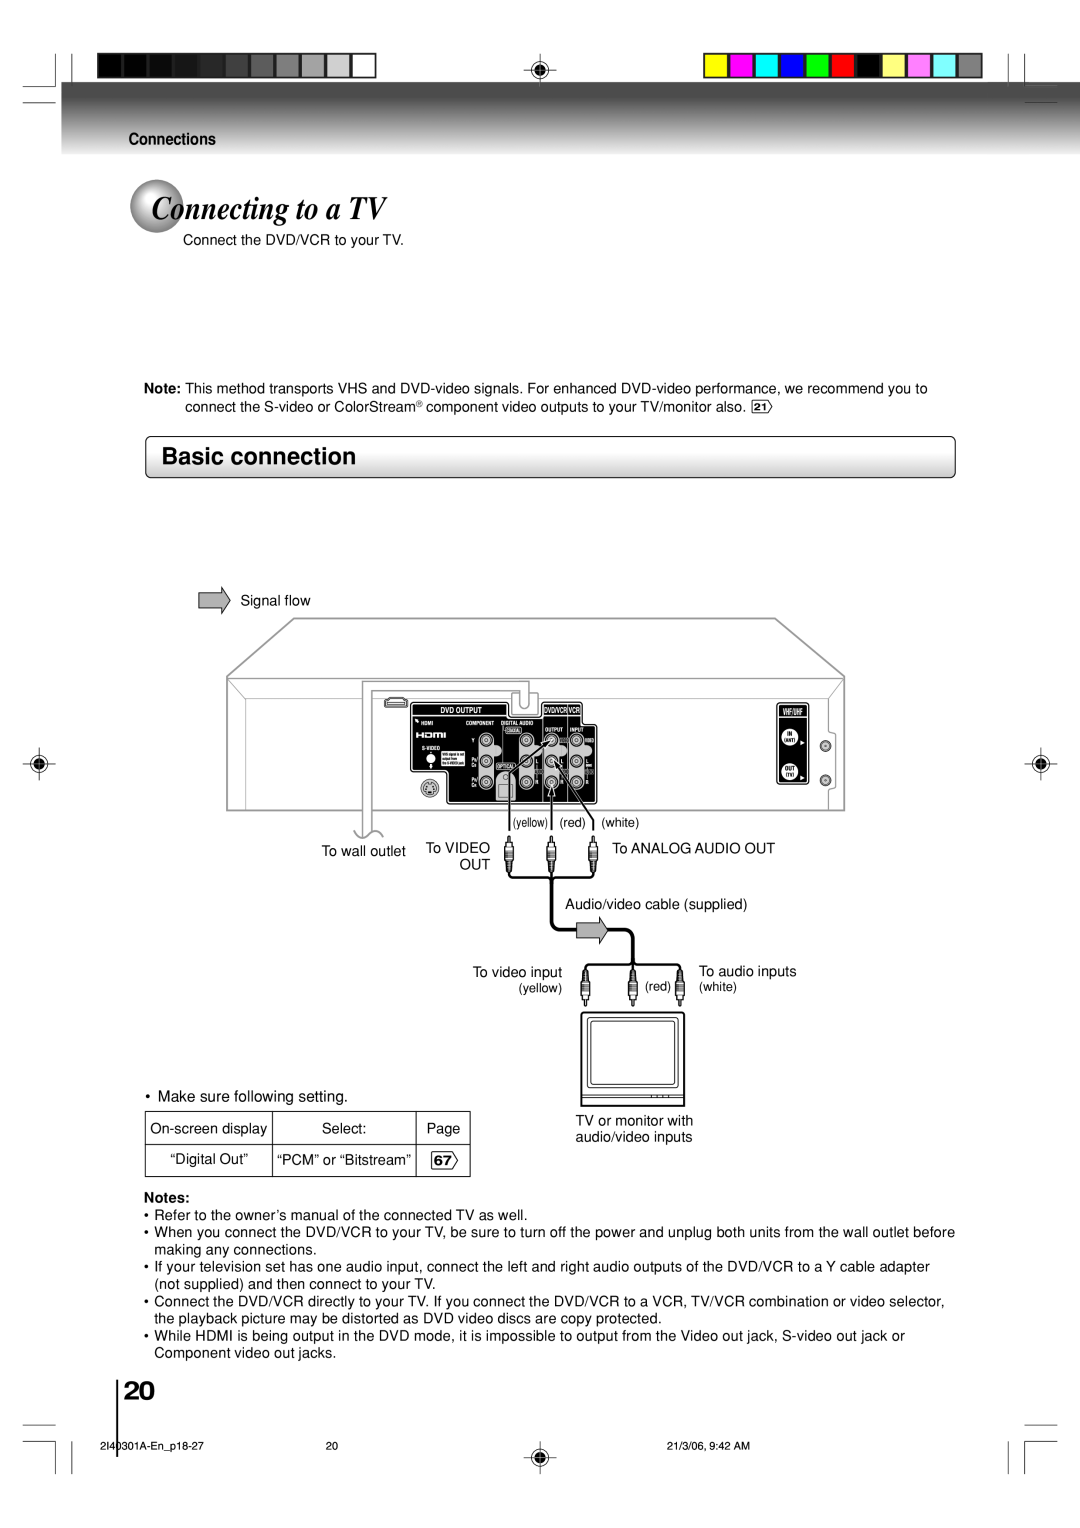 Toshiba SD-V594SC owner manual Connecting to a TV, Basic connection, Notes 